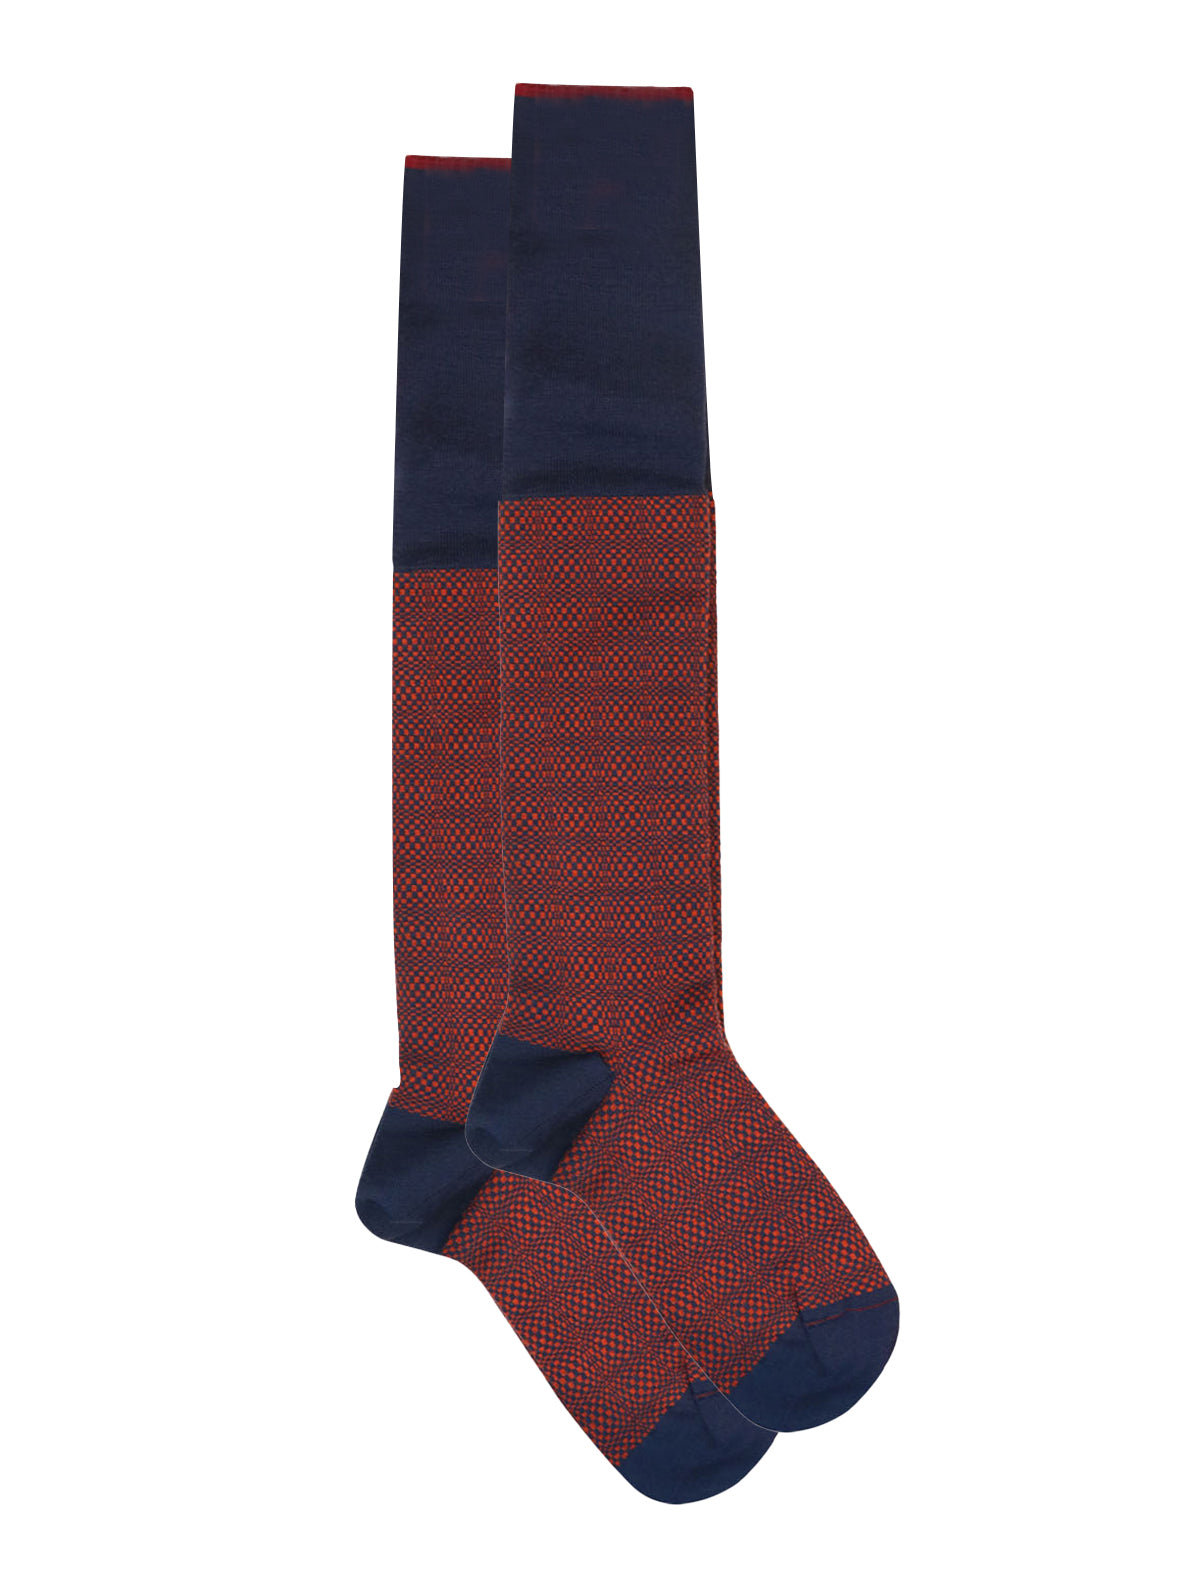 Gallo Long Socks in Navy w/ Abstract Red Print